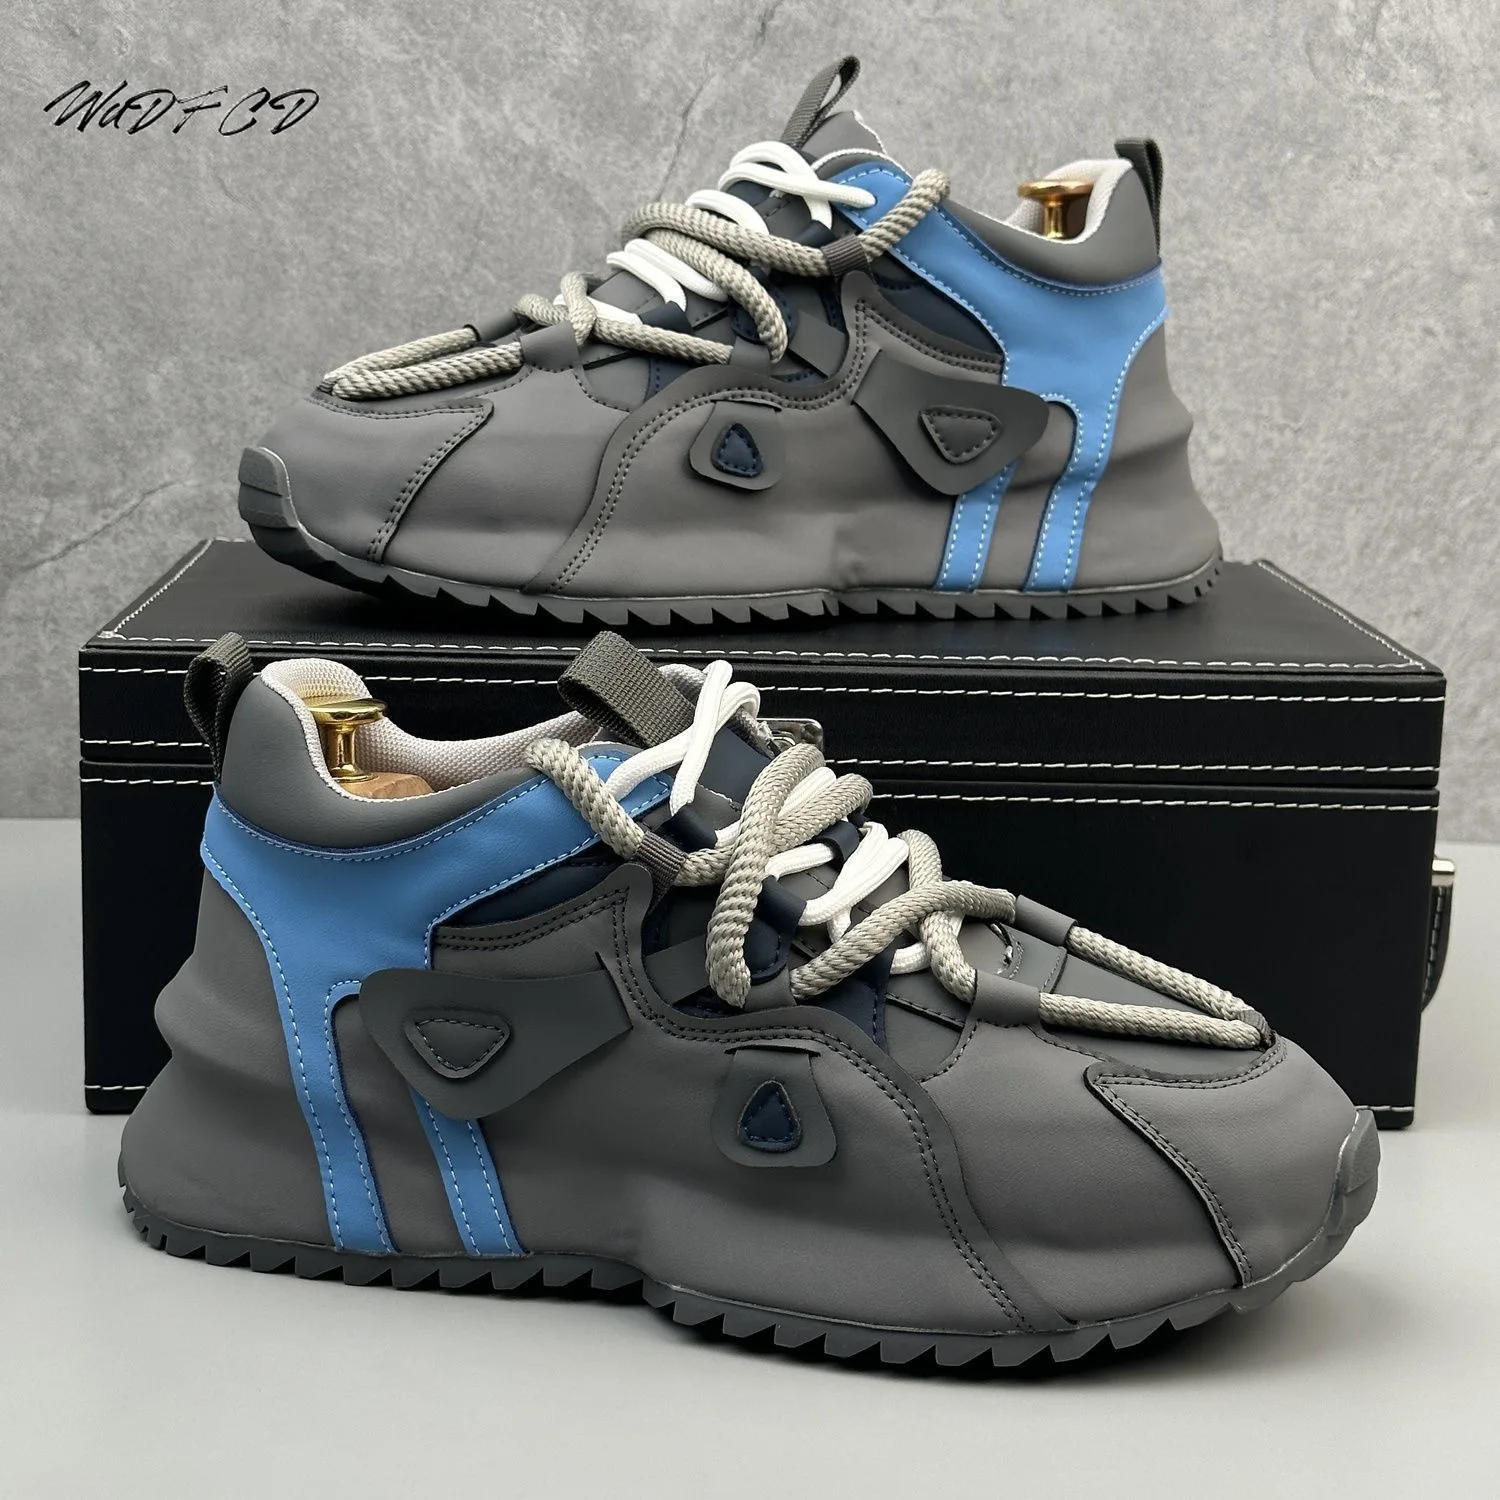 Chunky Sneakers Men Winter Plush Warm Snow Shoes Fashion Casual Microfiber Leather Upper Increased Internal Platform Sport Shoes